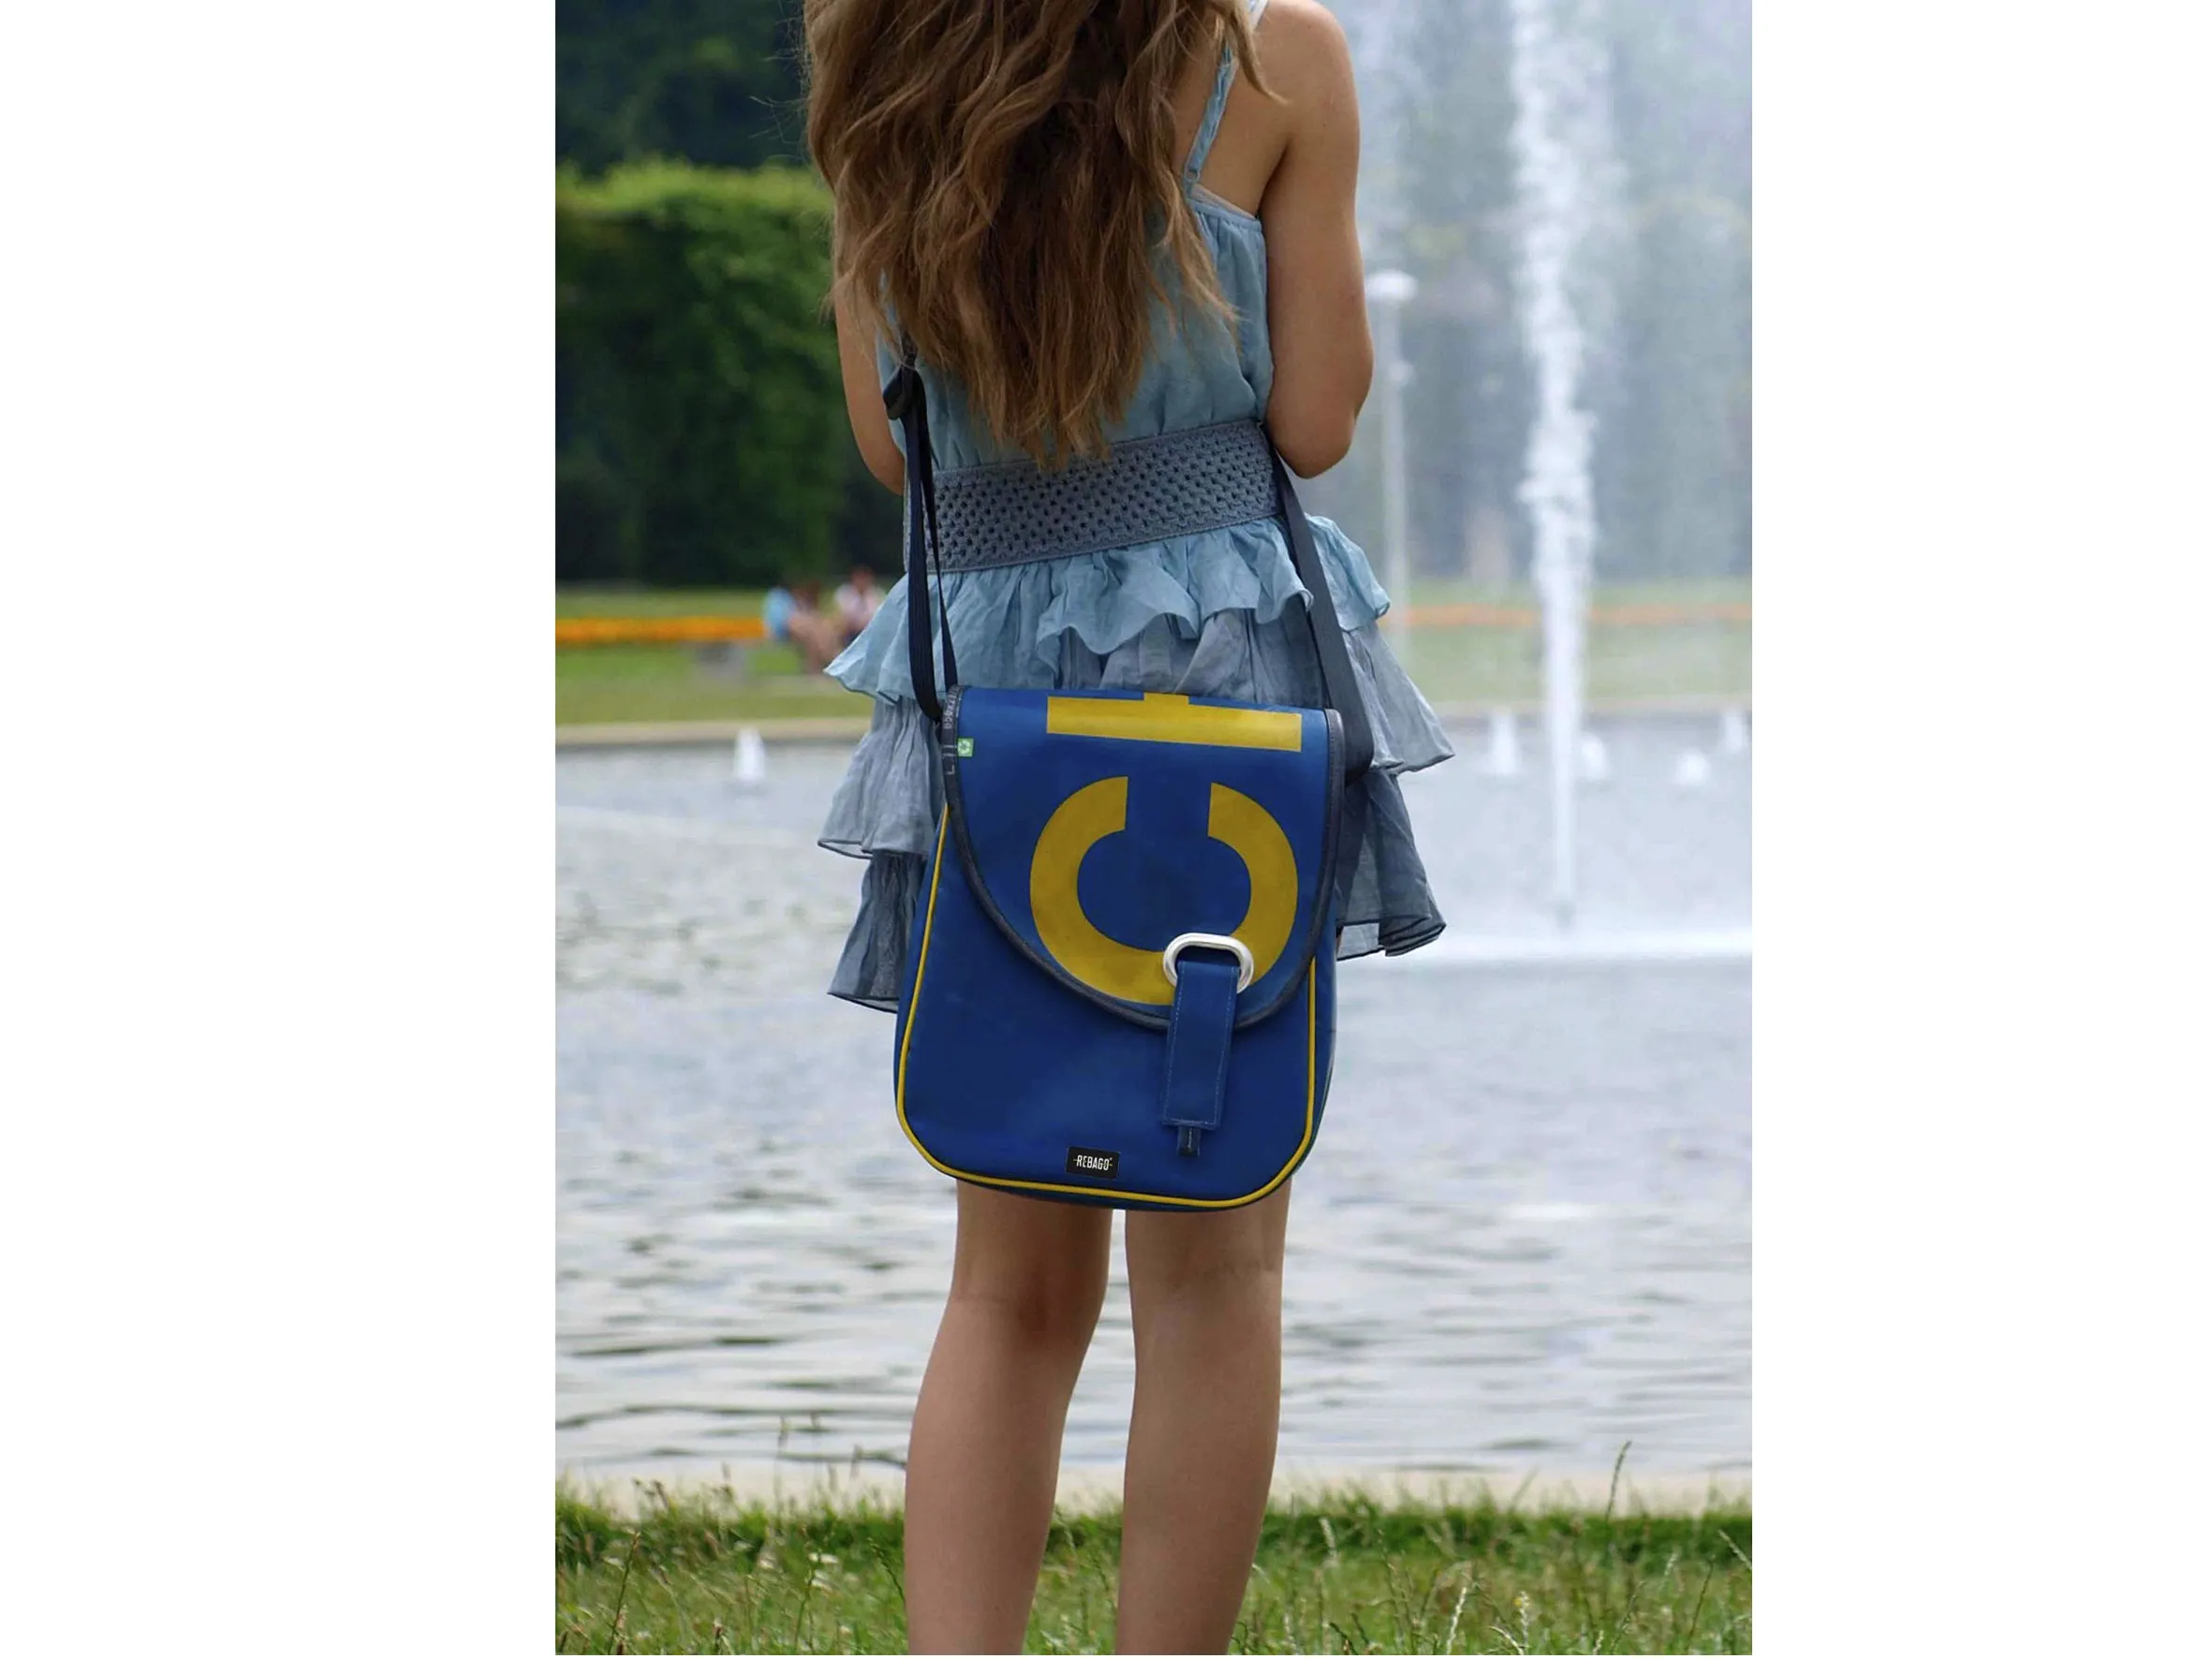 COCO-shoulder-bag-upcycled-backpack-recycled-upcycling-bags-1-Rebago